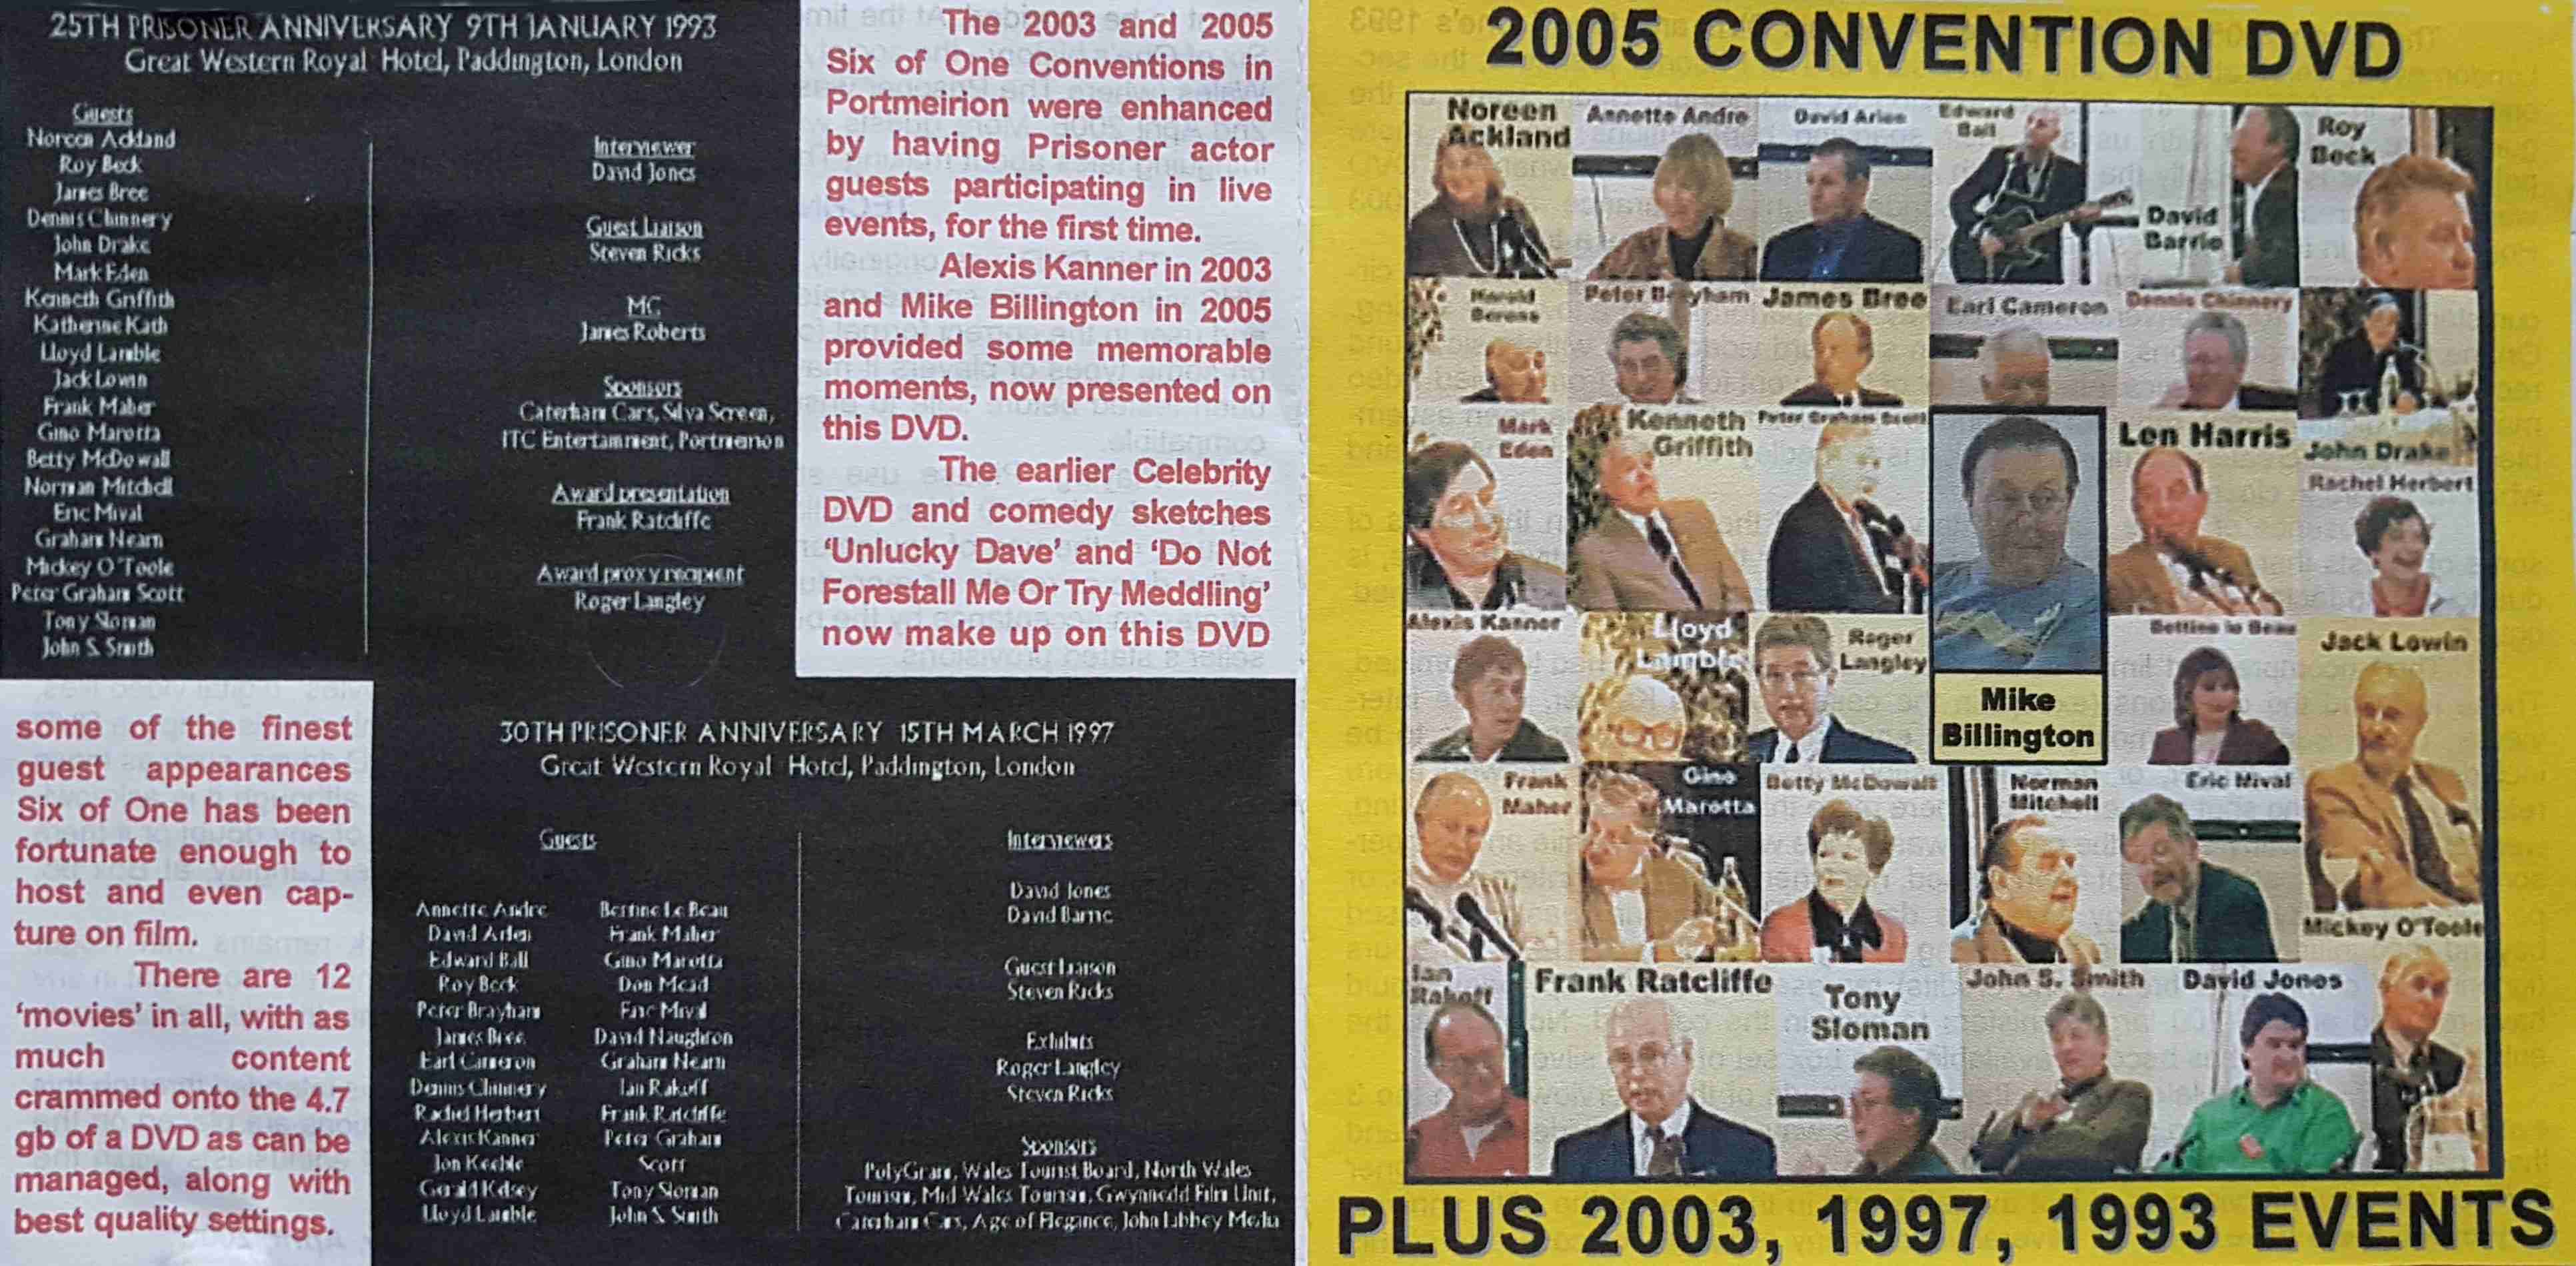 Picture of DVD-2005-CD 2005 convention DVD by artist Unknown from ITV, Channel 4 and Channel 5 library